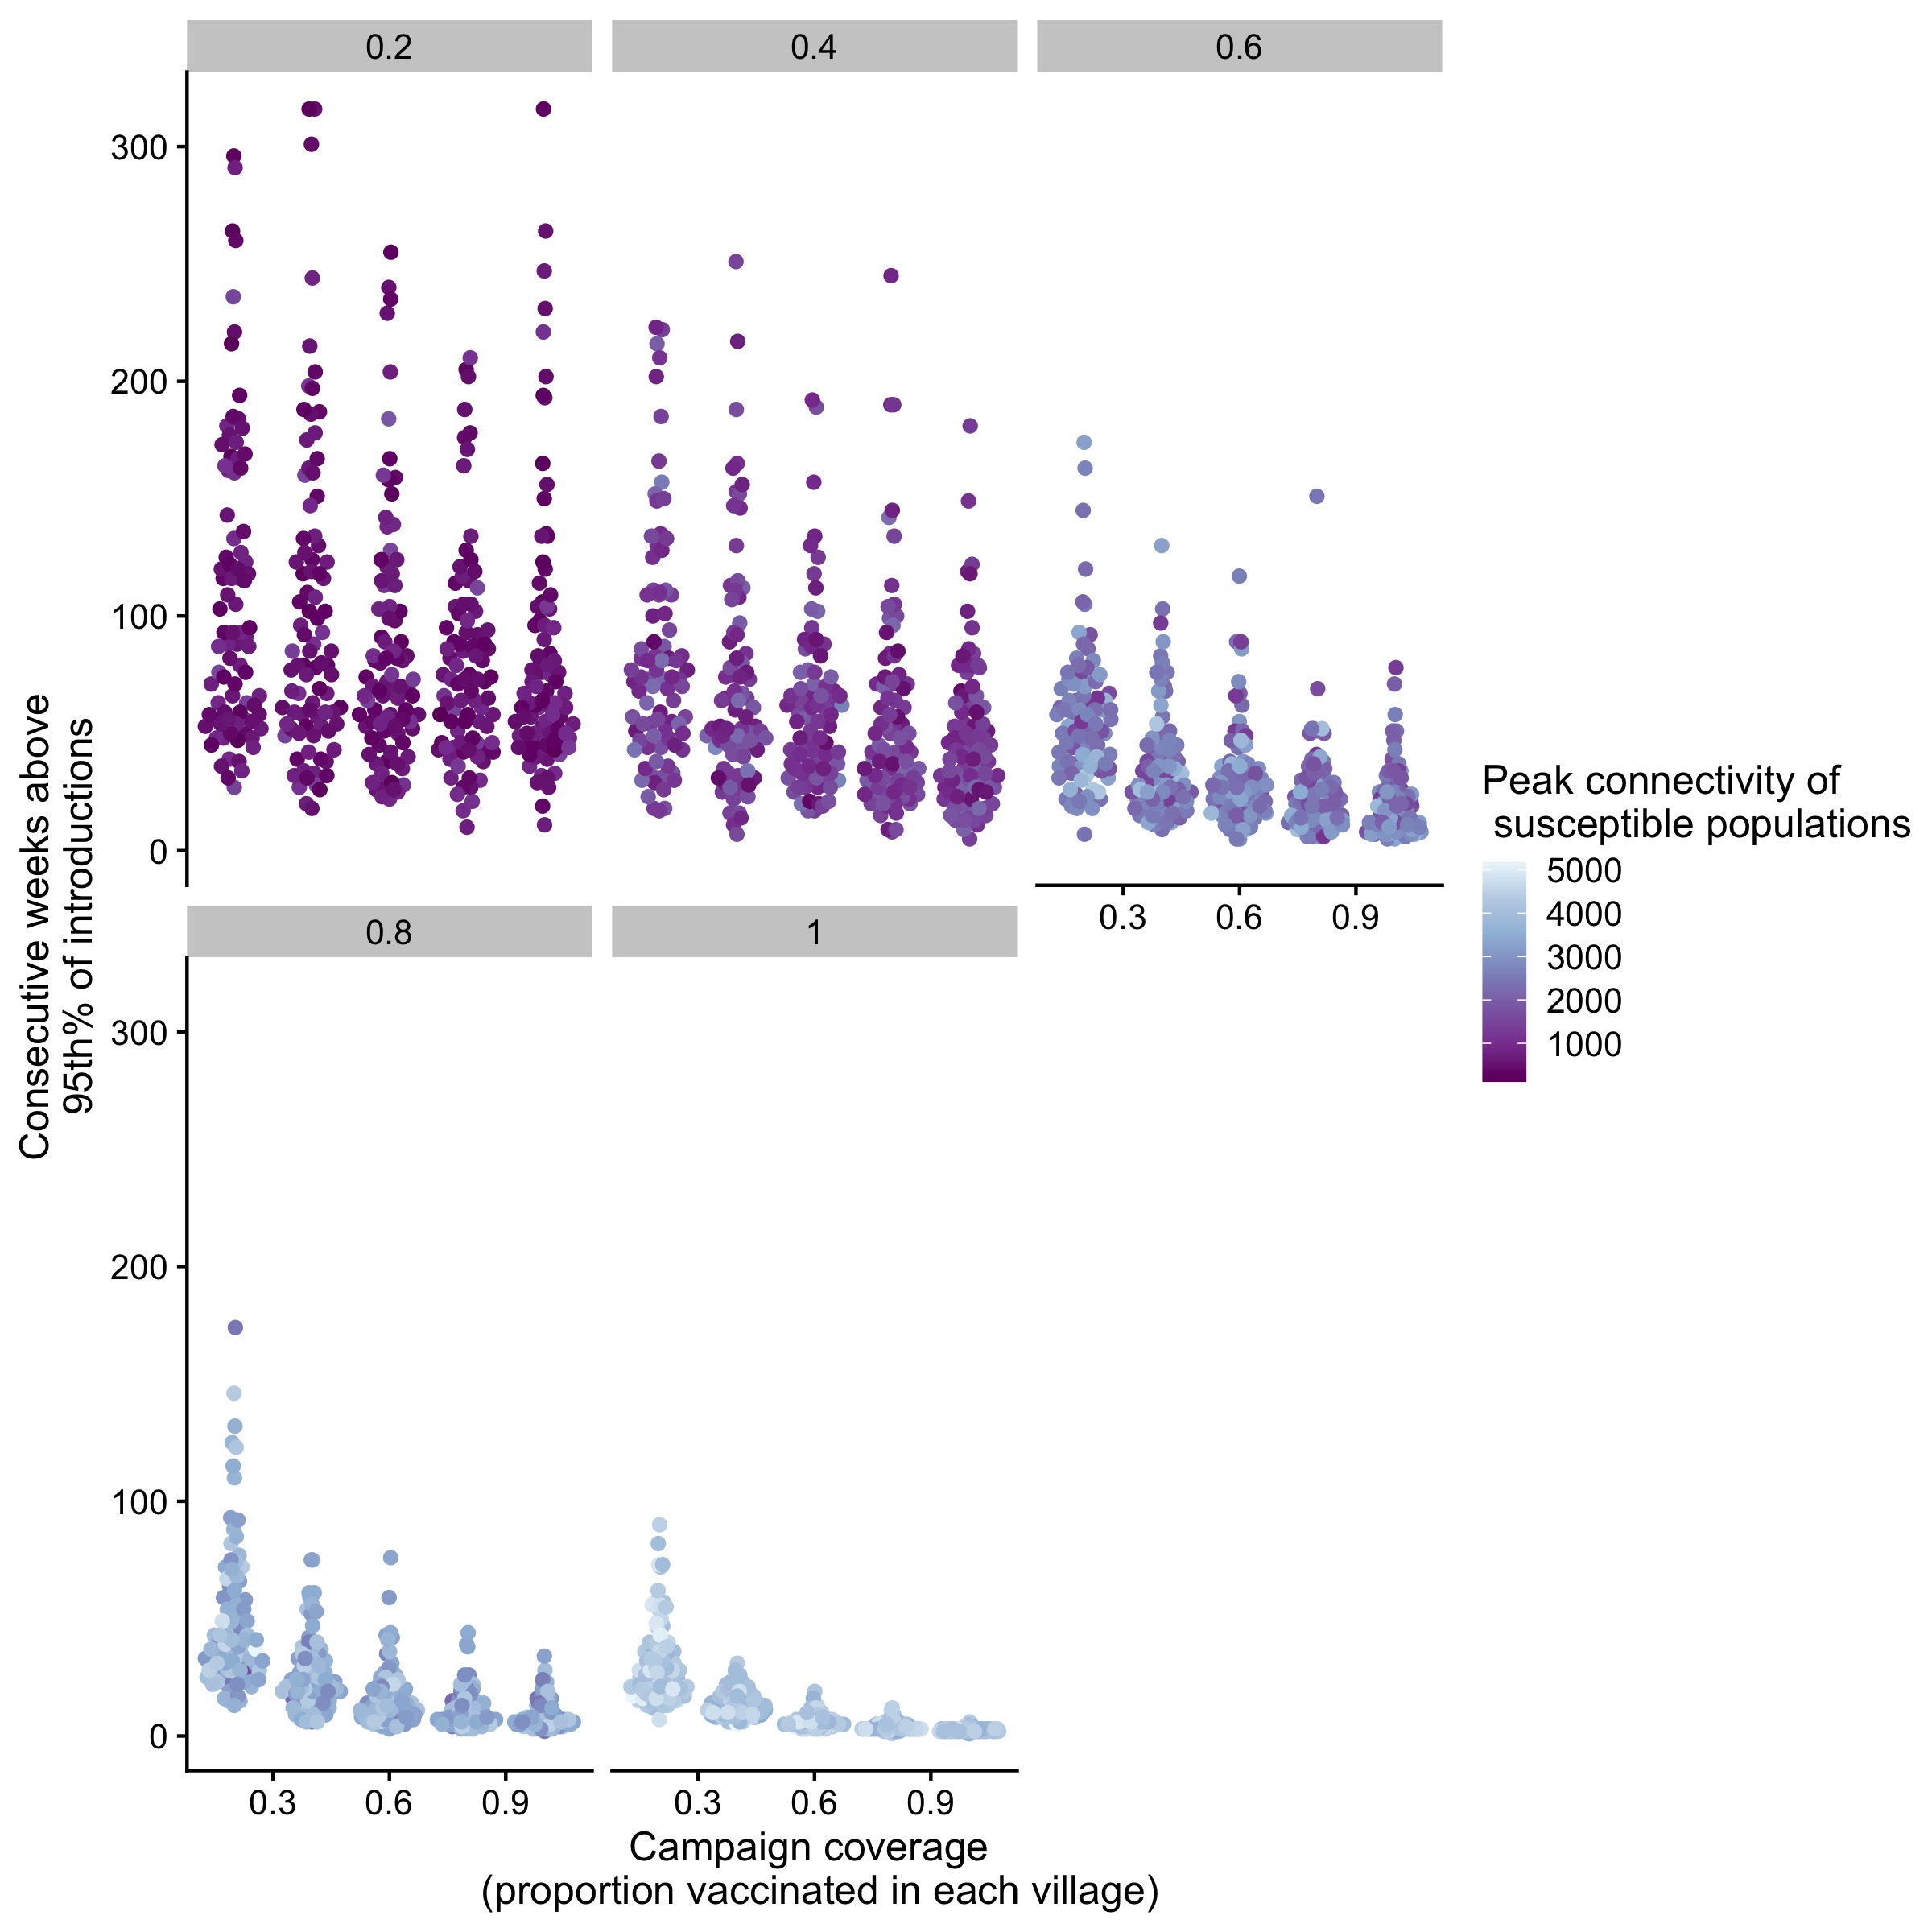 Outbreak durations (weeks with cases > 95th % of introductions) and their relationship to connectivity of villages across a range of campaign coverages (i.e. proportion vaccinated in each village, x-axis) and spatial coverage (proportion of villages vaccinated, panels).